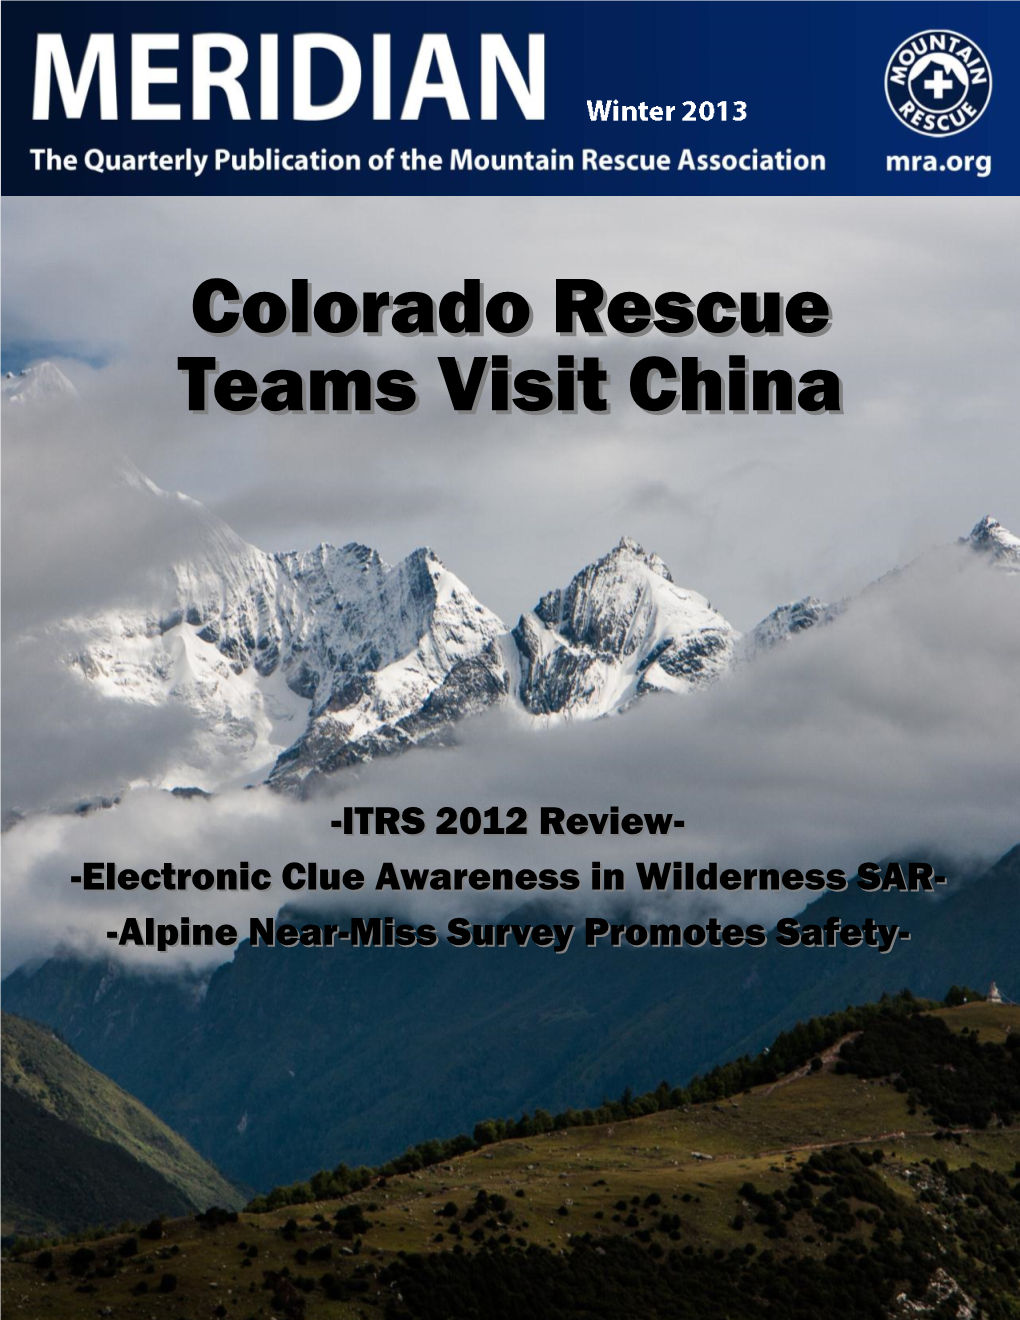 Colorado Rescue Teams Visit China…..…………………………..3 Dave Clarke Portland Mountain Rescue Message from the President……………..………………………...5 Daveclarke@Frontier.Com